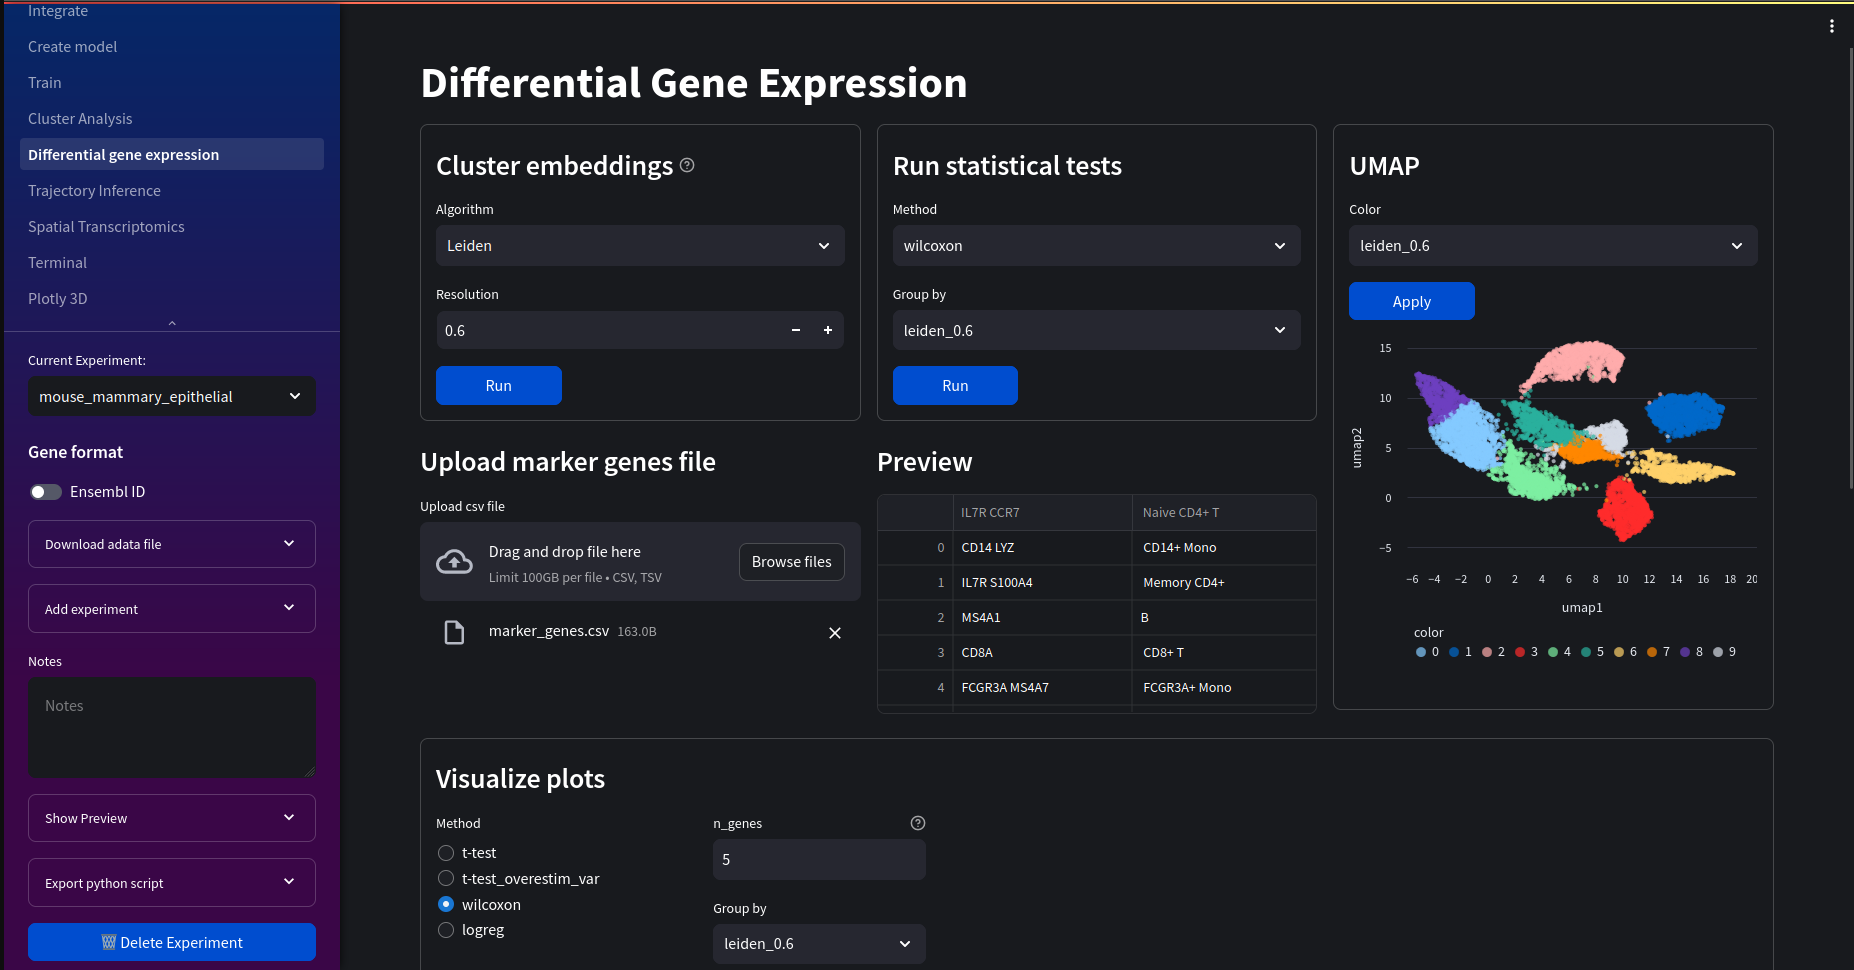 Differential gene expression